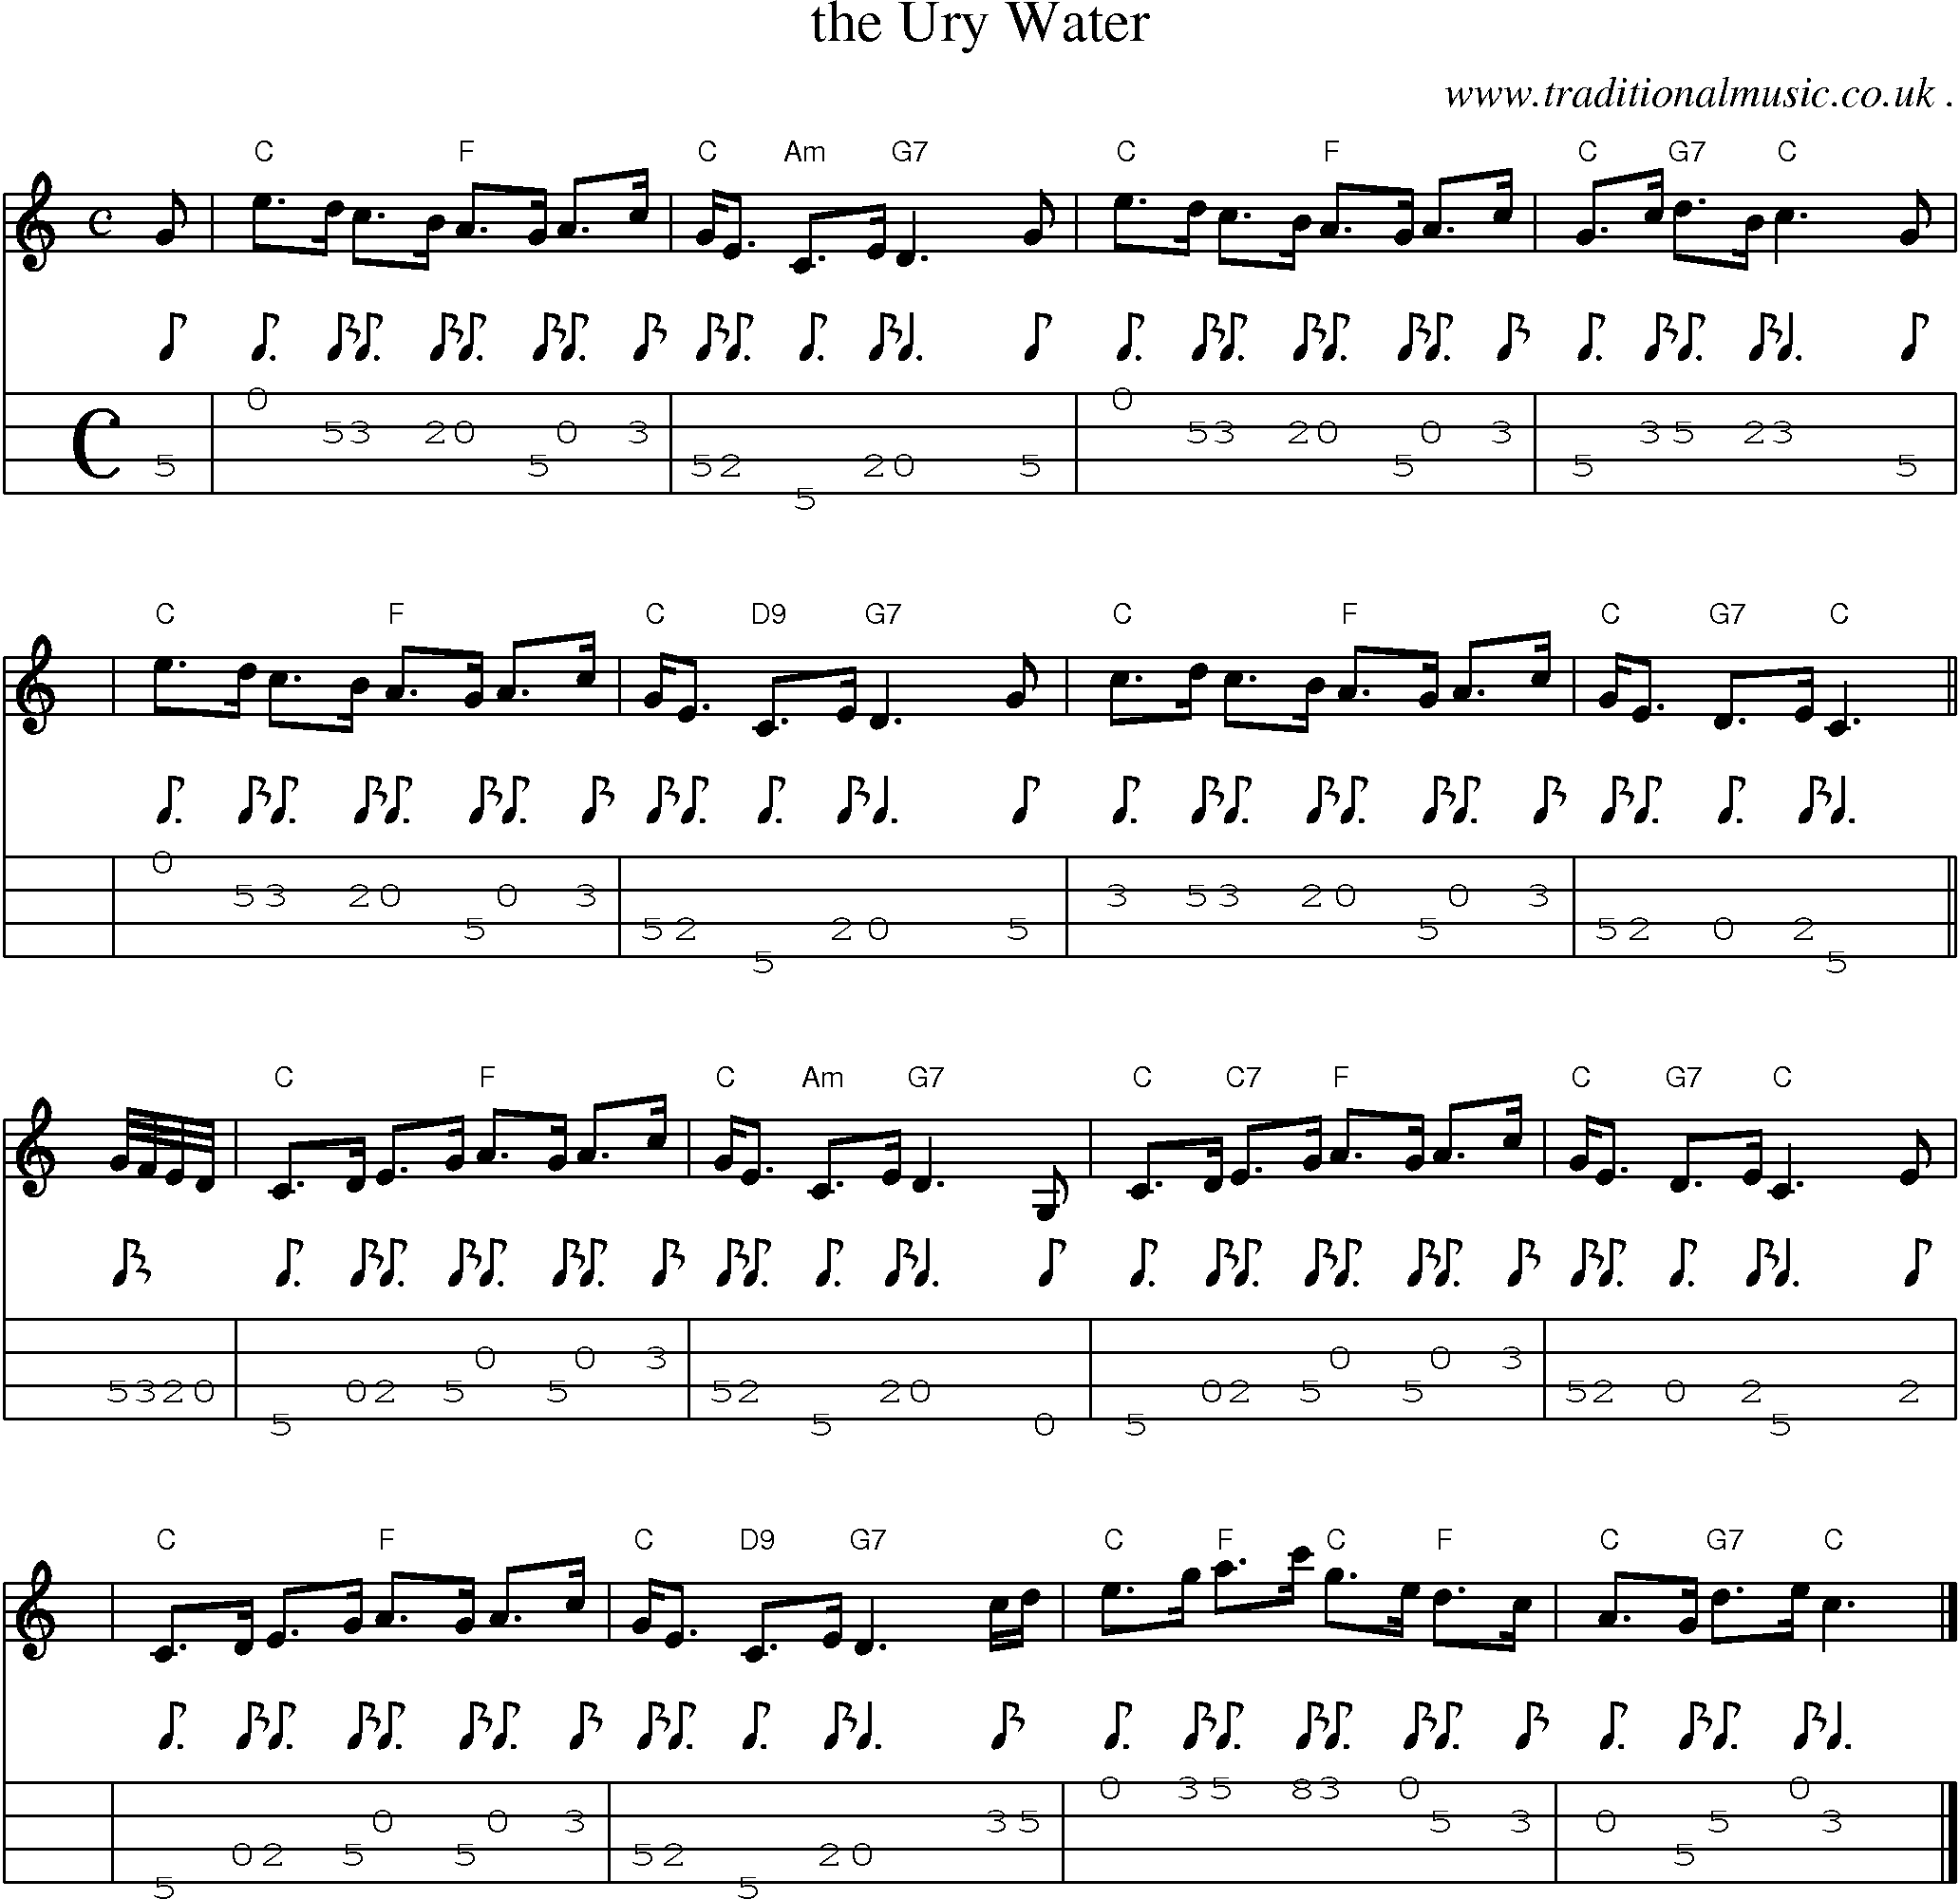 Sheet-music  score, Chords and Mandolin Tabs for The Ury Water